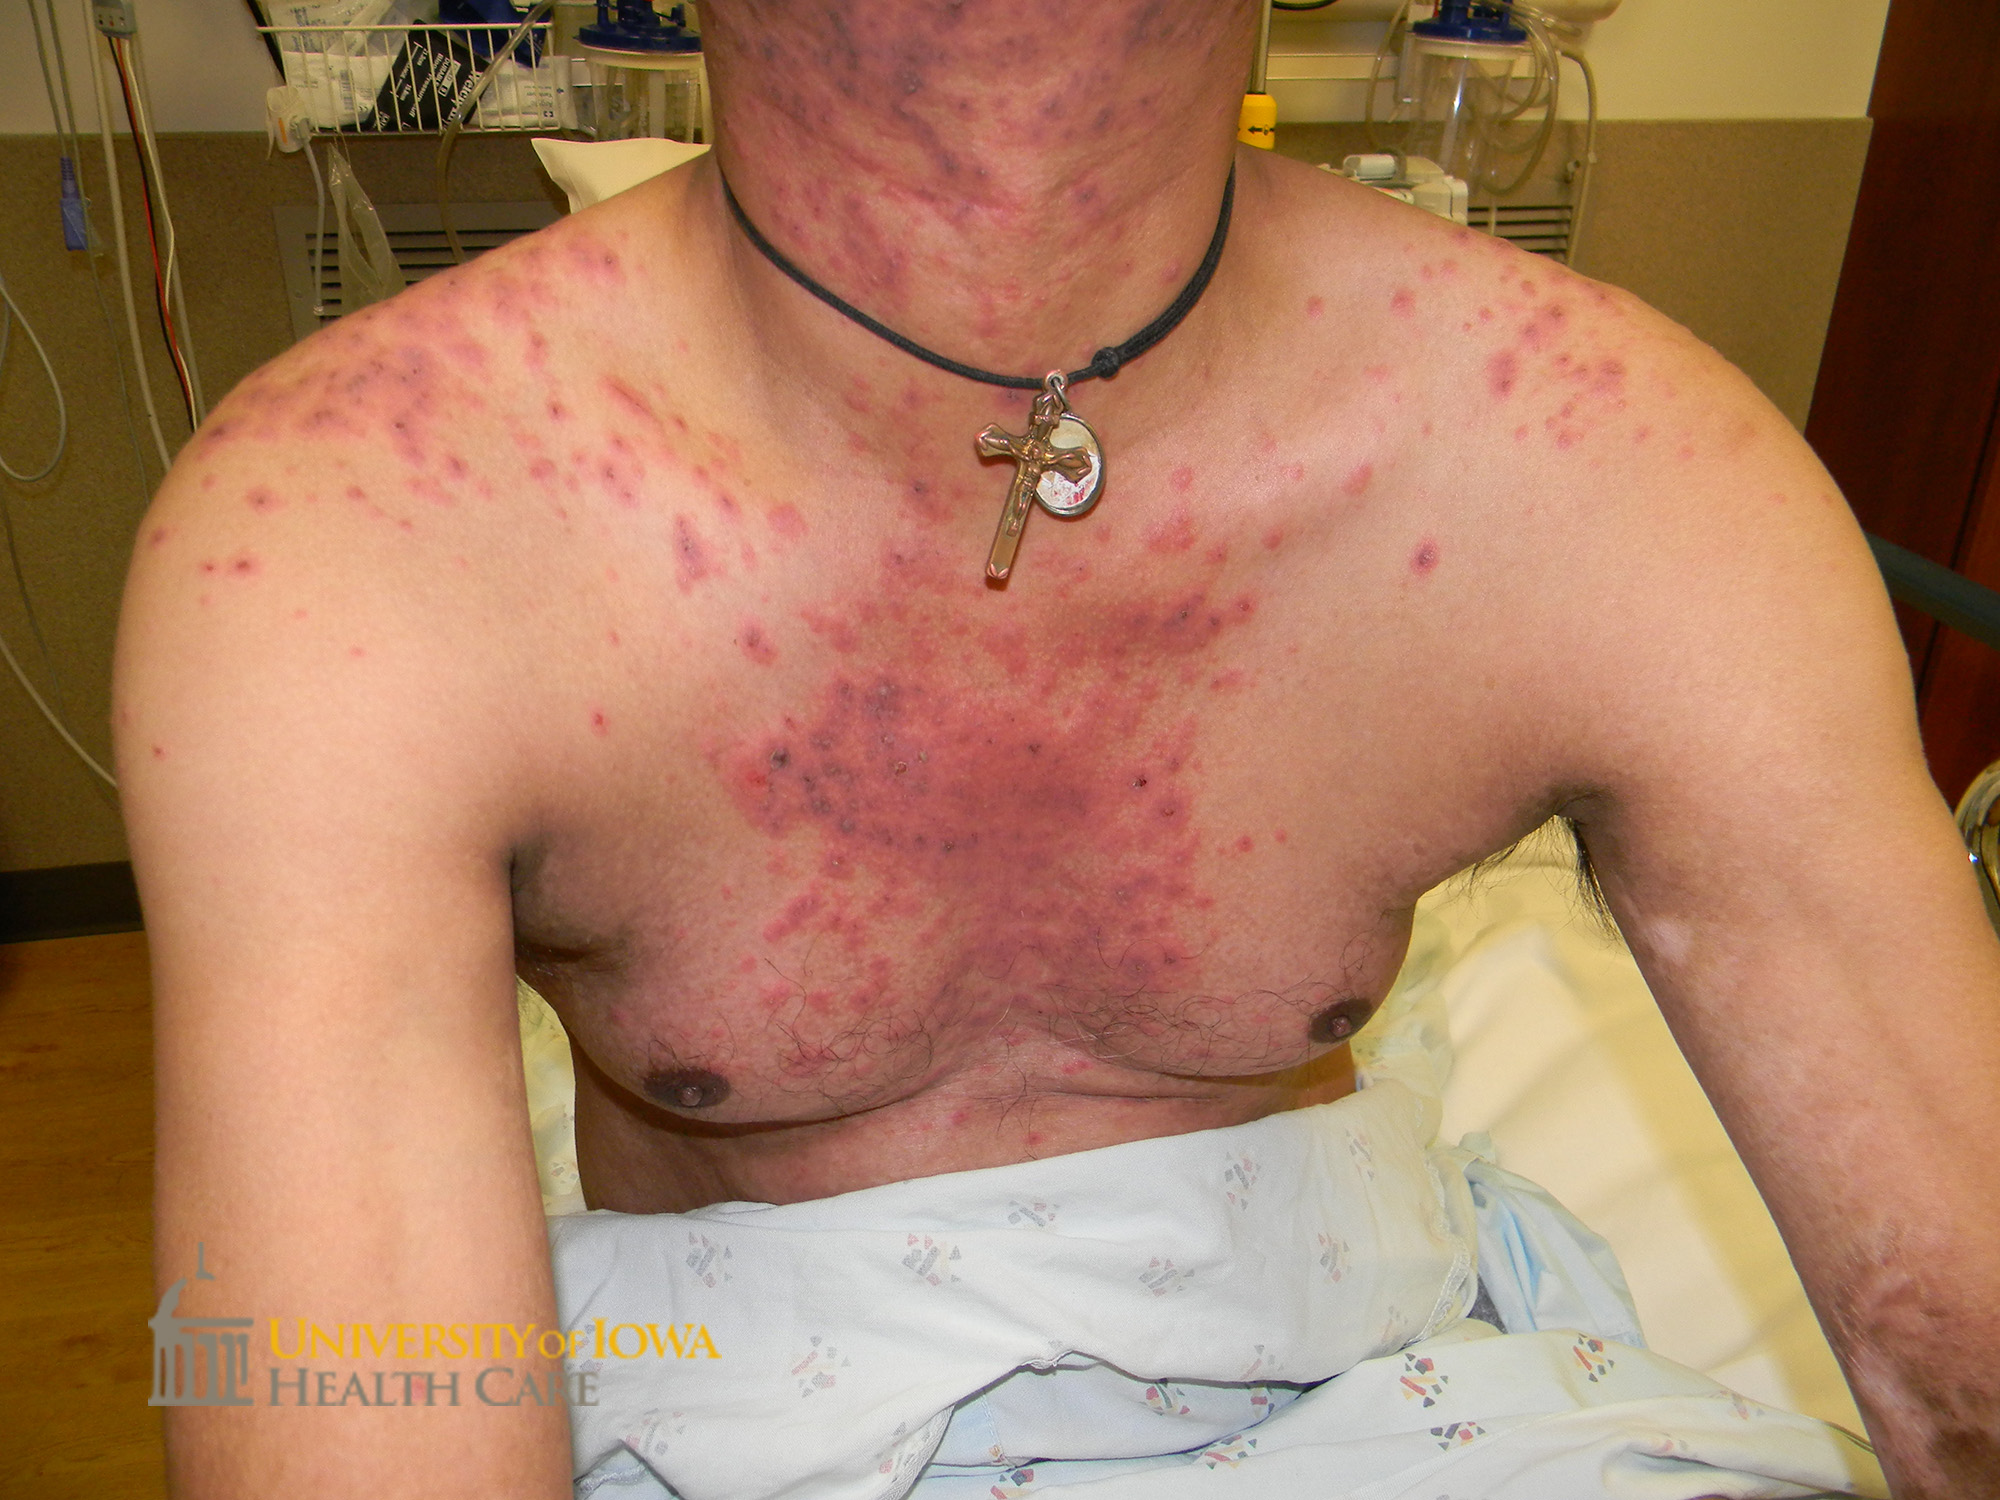 Atypical targetoid papules coalescing into plaques, some with with central purpura, on the trunk and extremities. (click images for higher resolution).